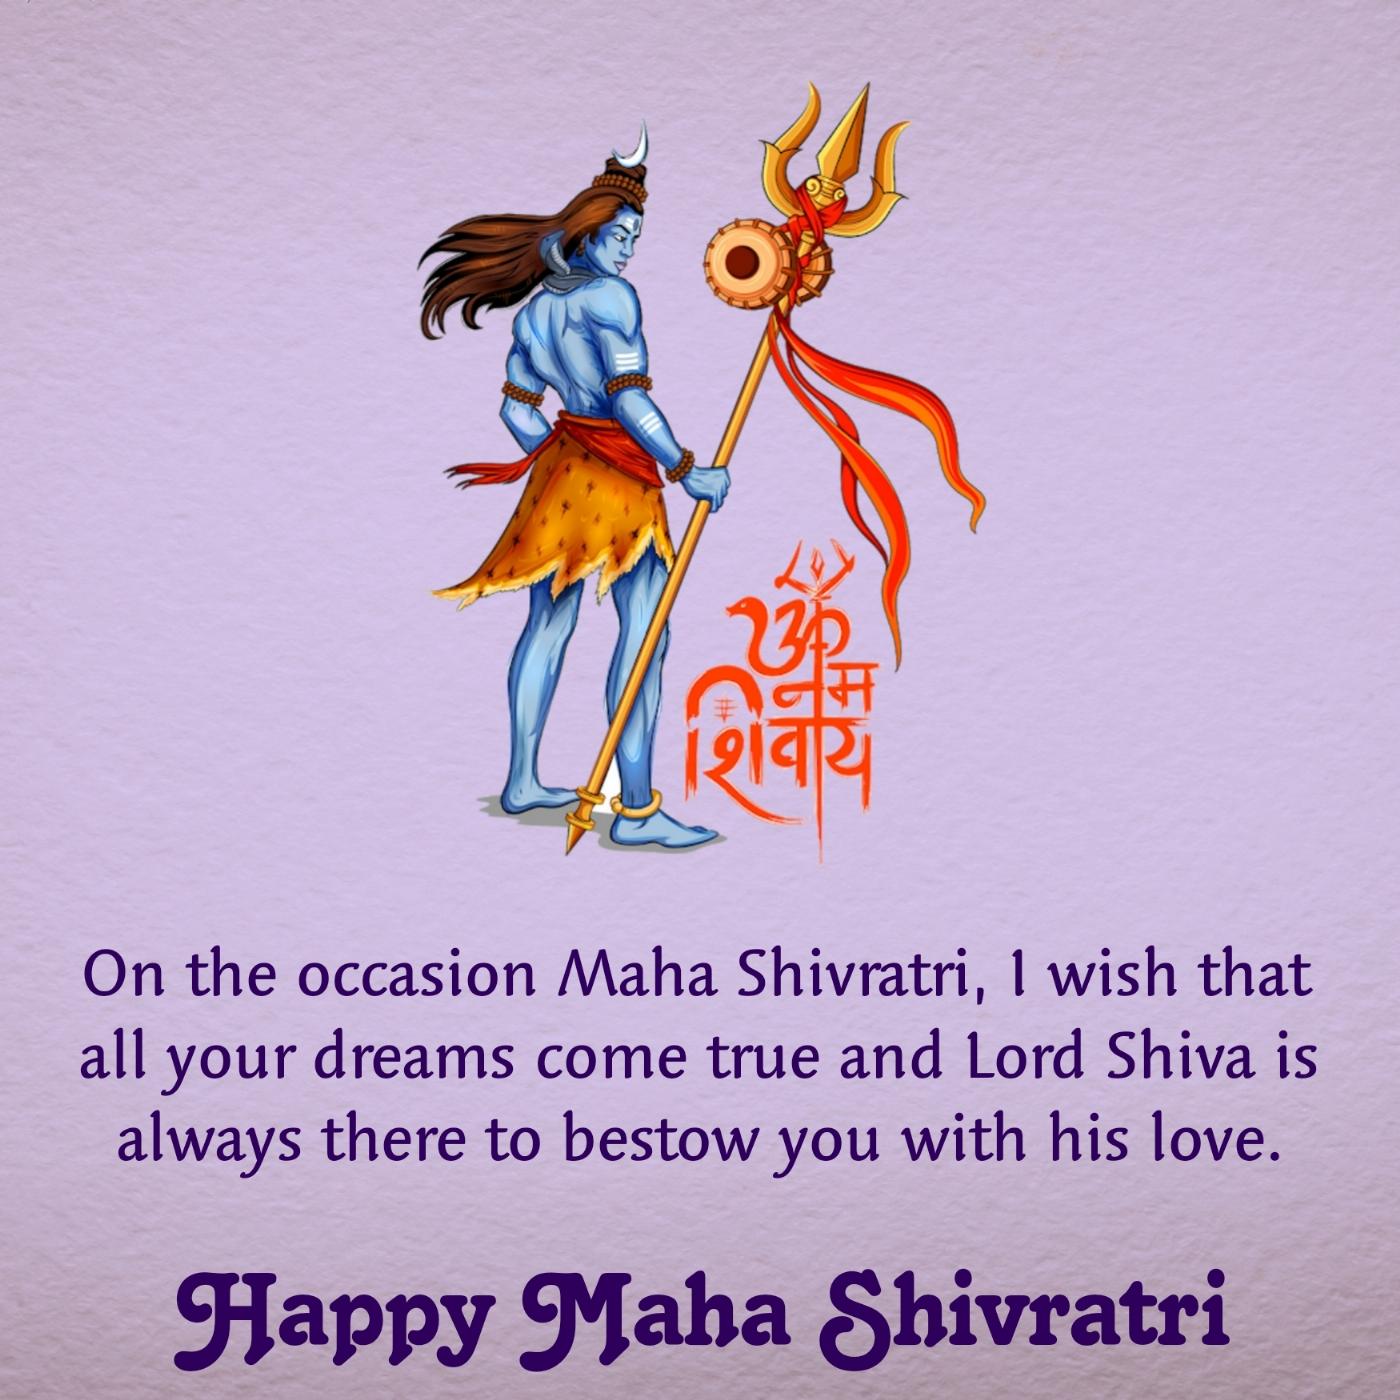 On the occasion Maha Shivratri I wish that all your dreams